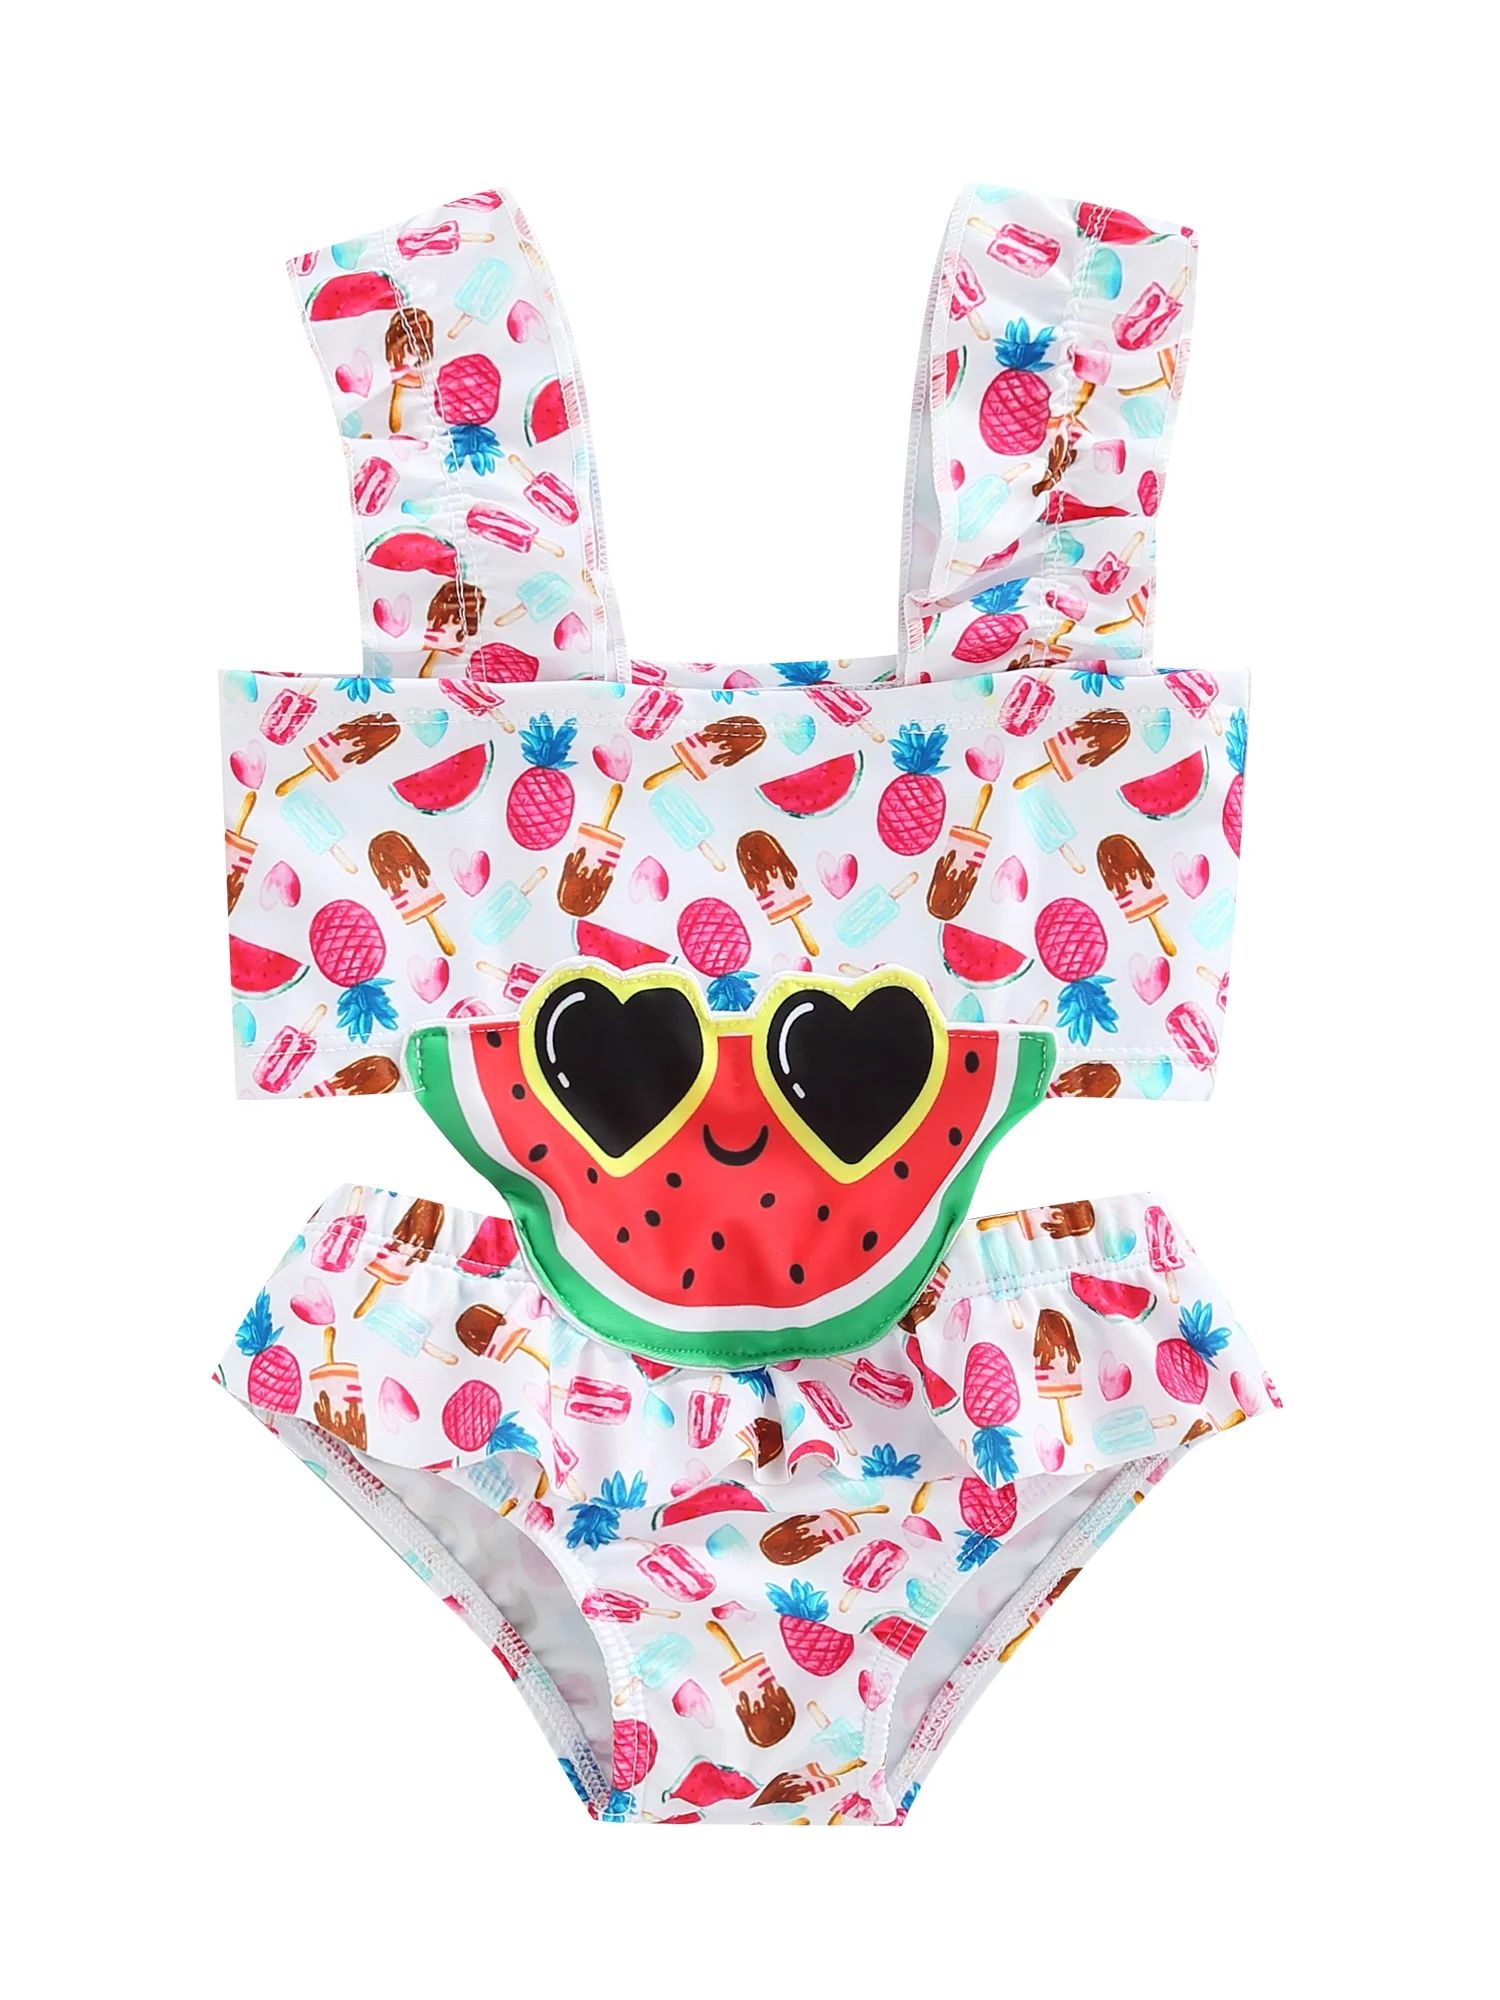 TheFound Toddler Baby Girl One-Piece Swimsuit 2T 3T 4T 5T Kids Bathing Suit Watermelon Print Slee... | Walmart (US)